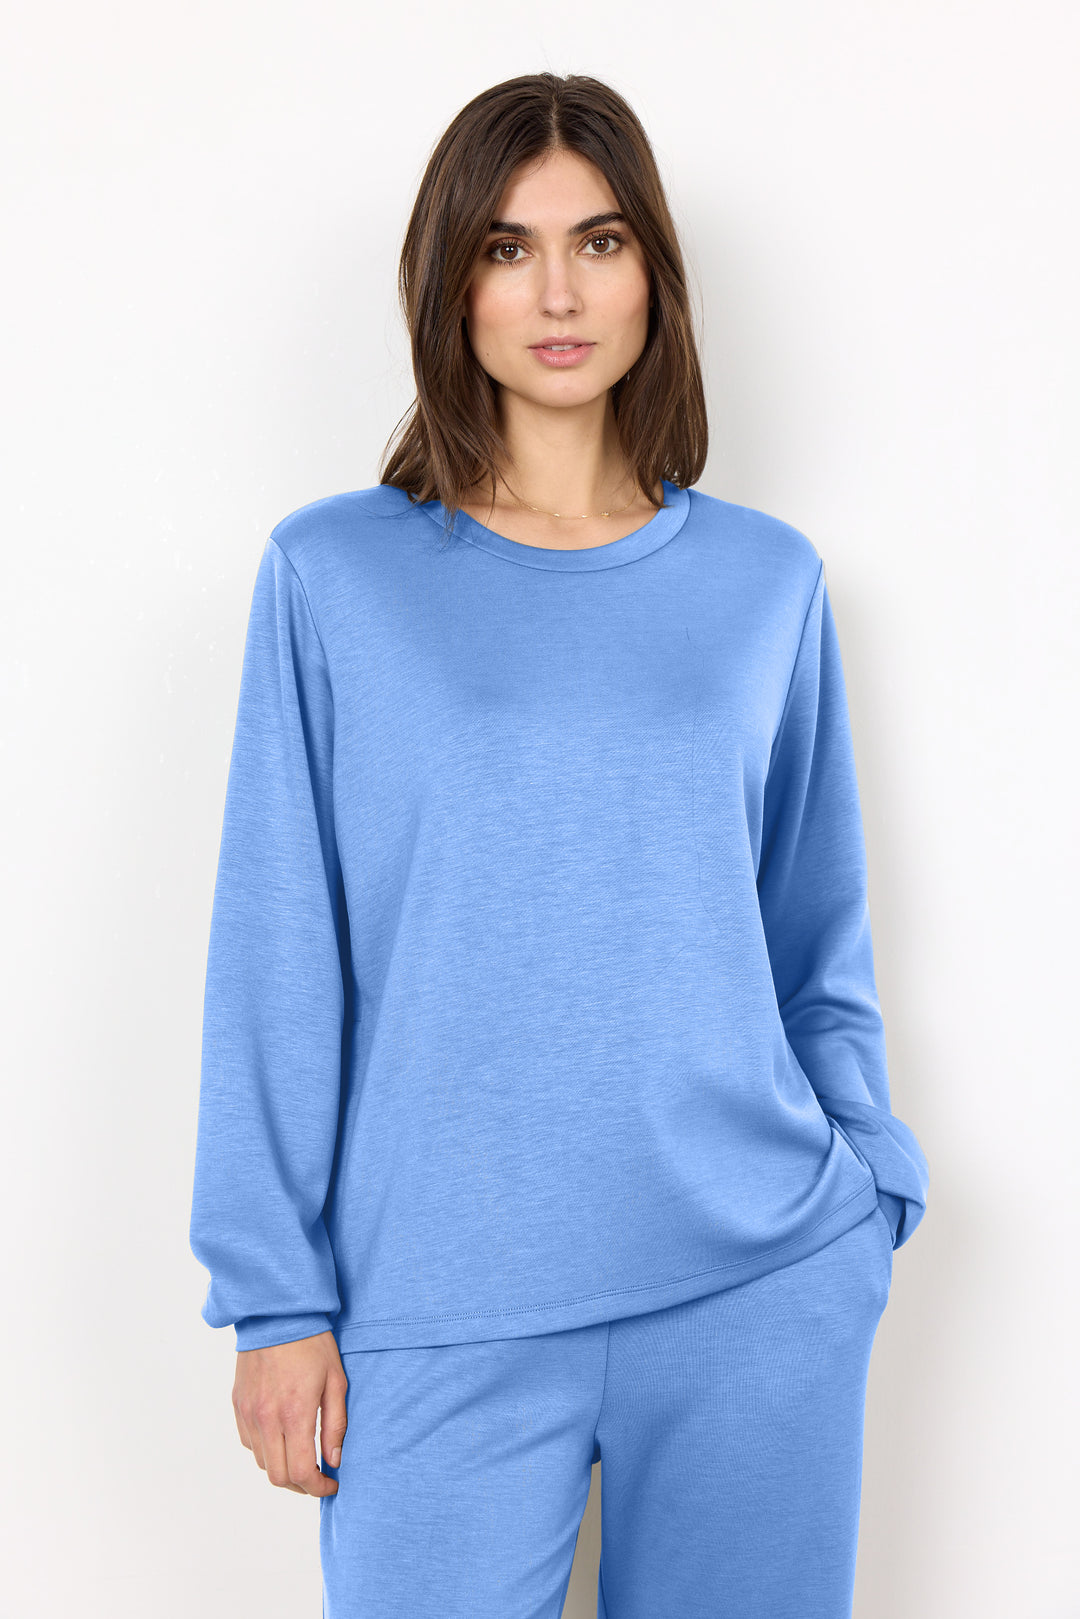 Products Soya Concept Banu 134 Soft Touch Jumper with Button Opening Sides  Blue Front View | Dotique